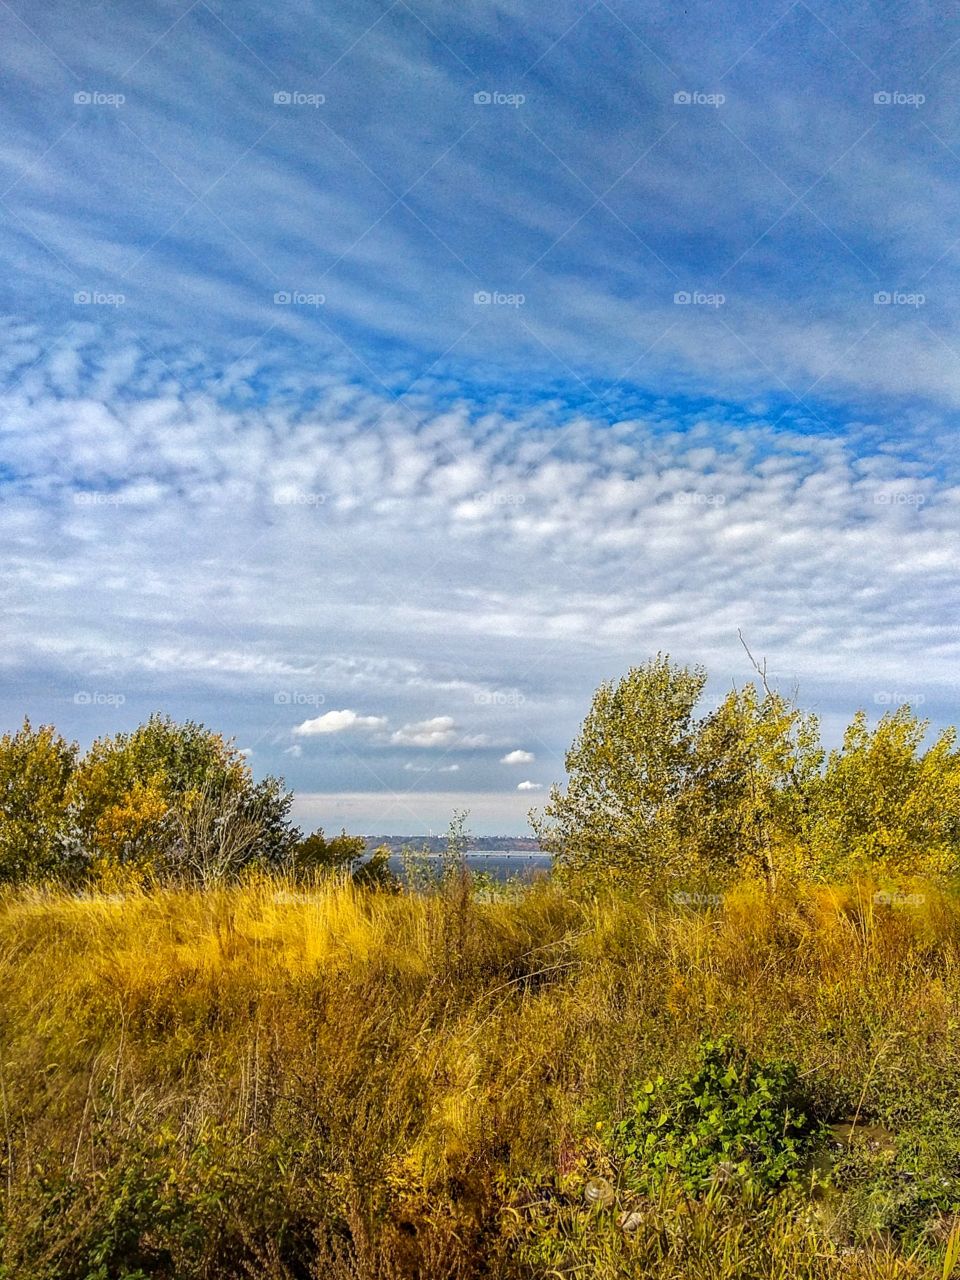 View of a very beautiful blue sky covered with a cloudy pattern, spread over the autumn landscape, above the golden grass flooded with sunlight against the background of the Volga River (Russia) and the horizon line beyond the river on a sunny day.